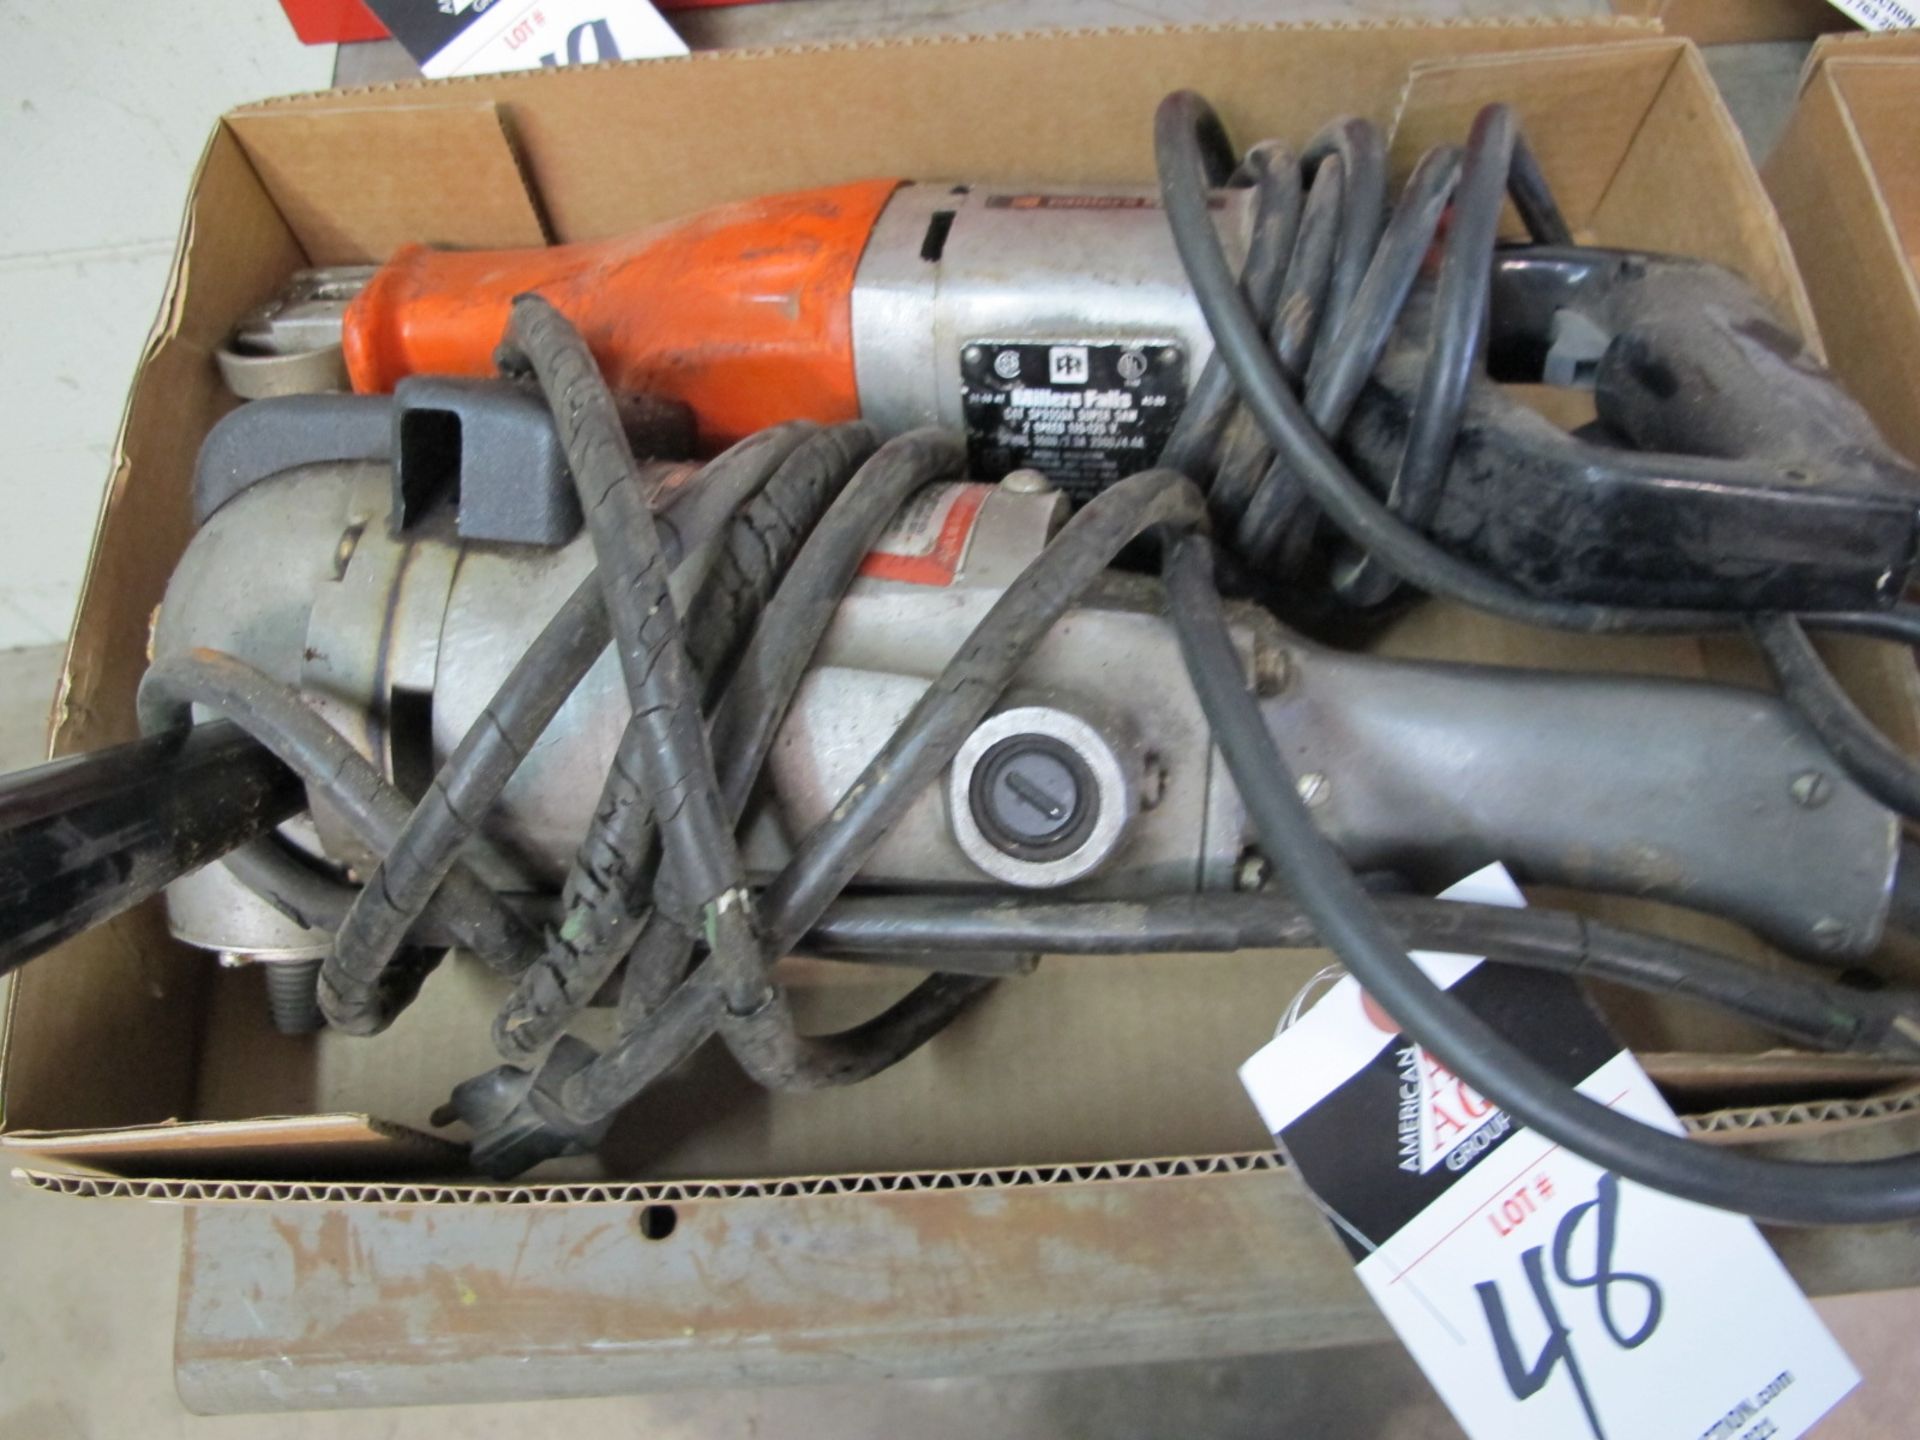 Saws all and Milwakee Angle Grinder